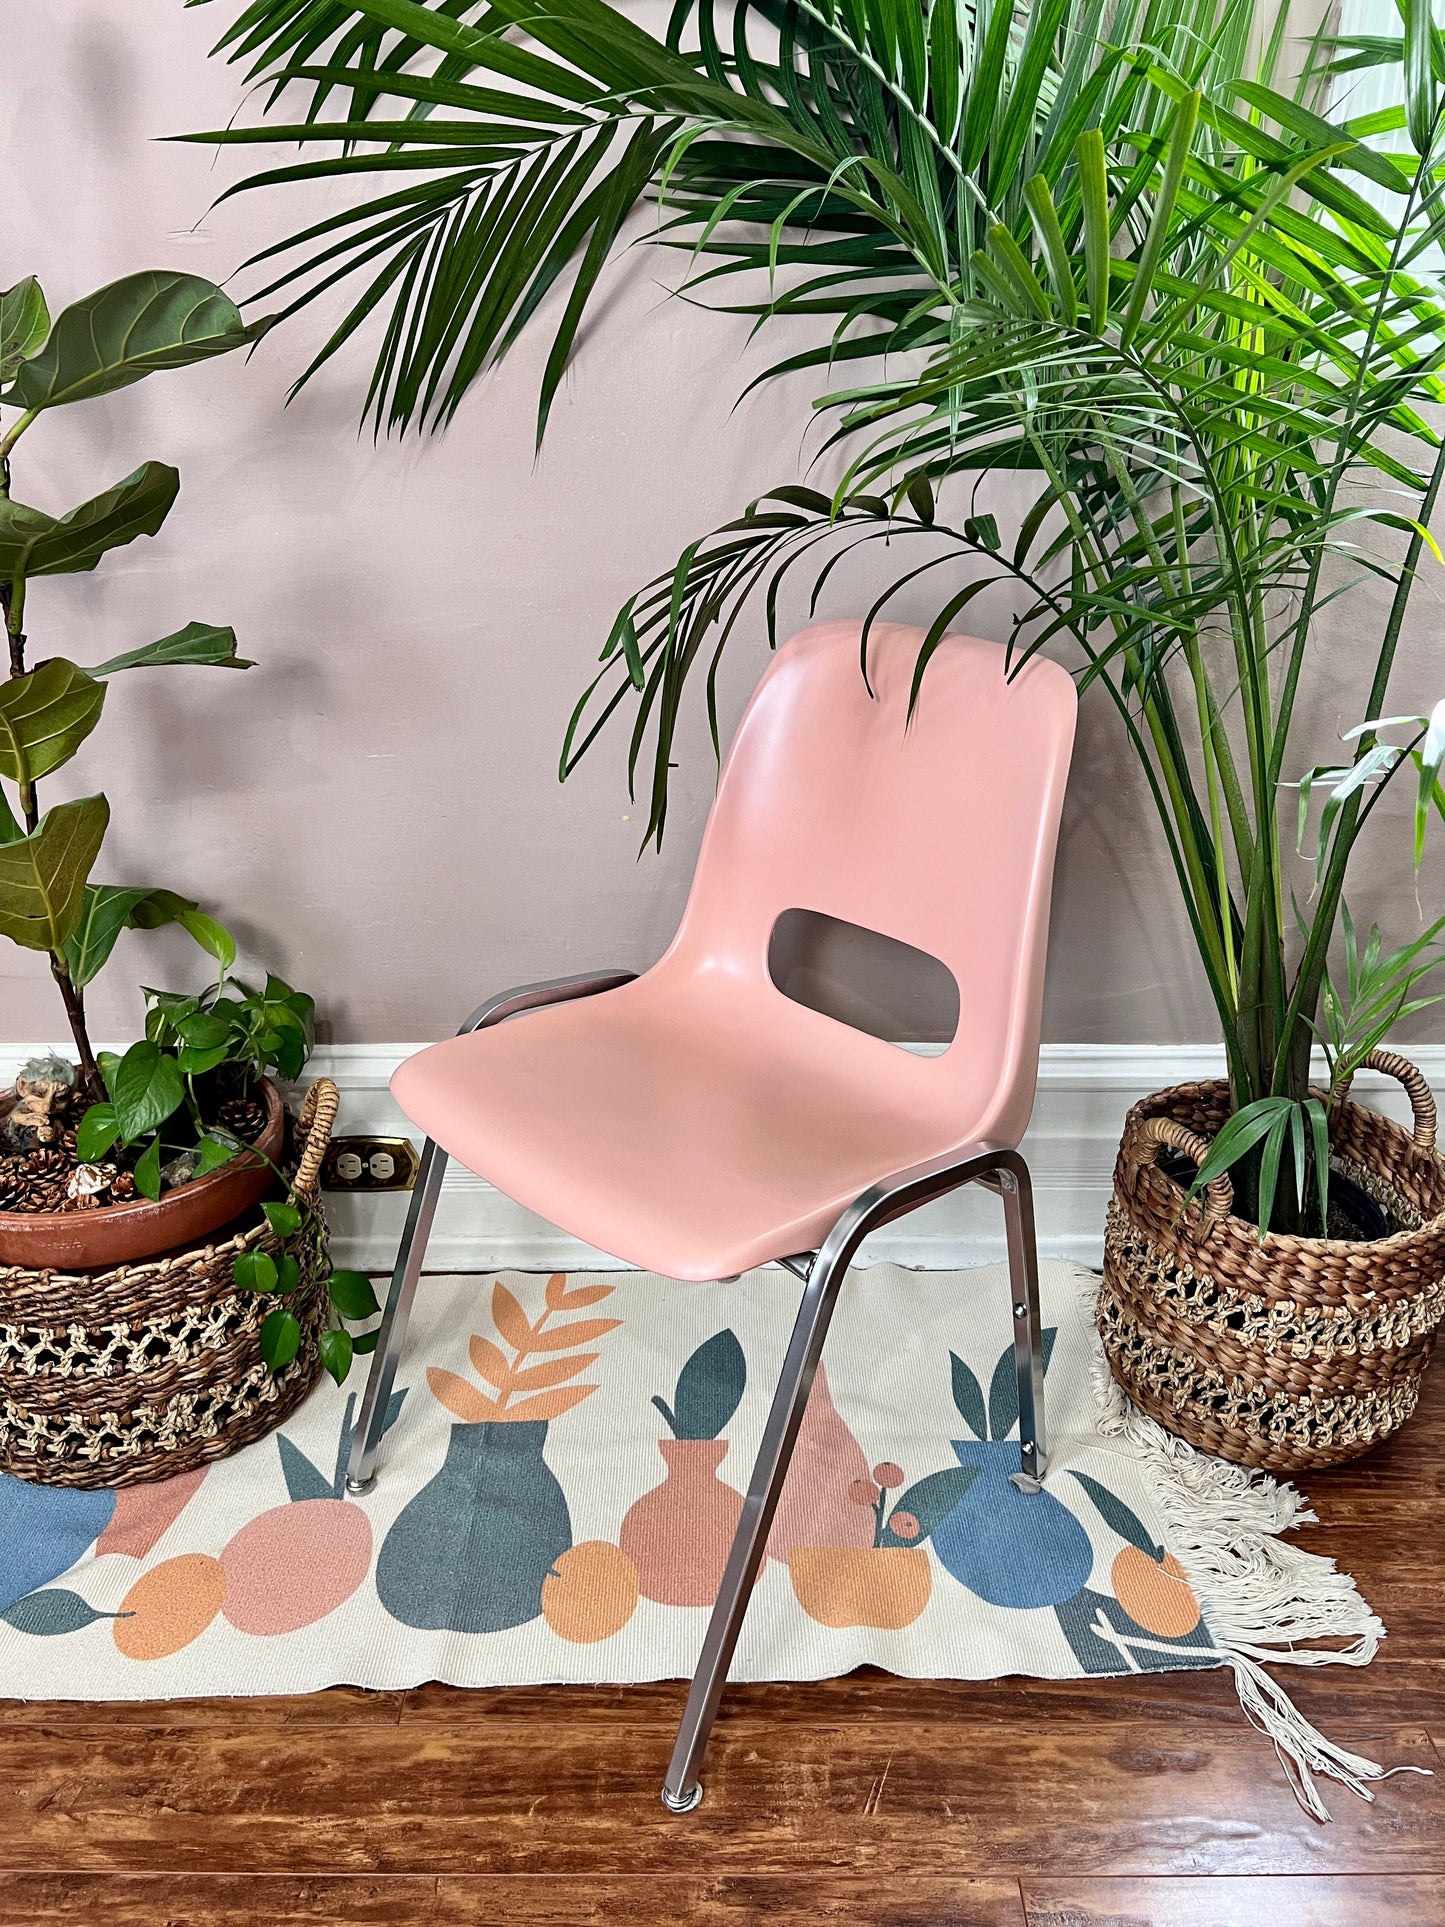 The Pink Flamingo Chairs